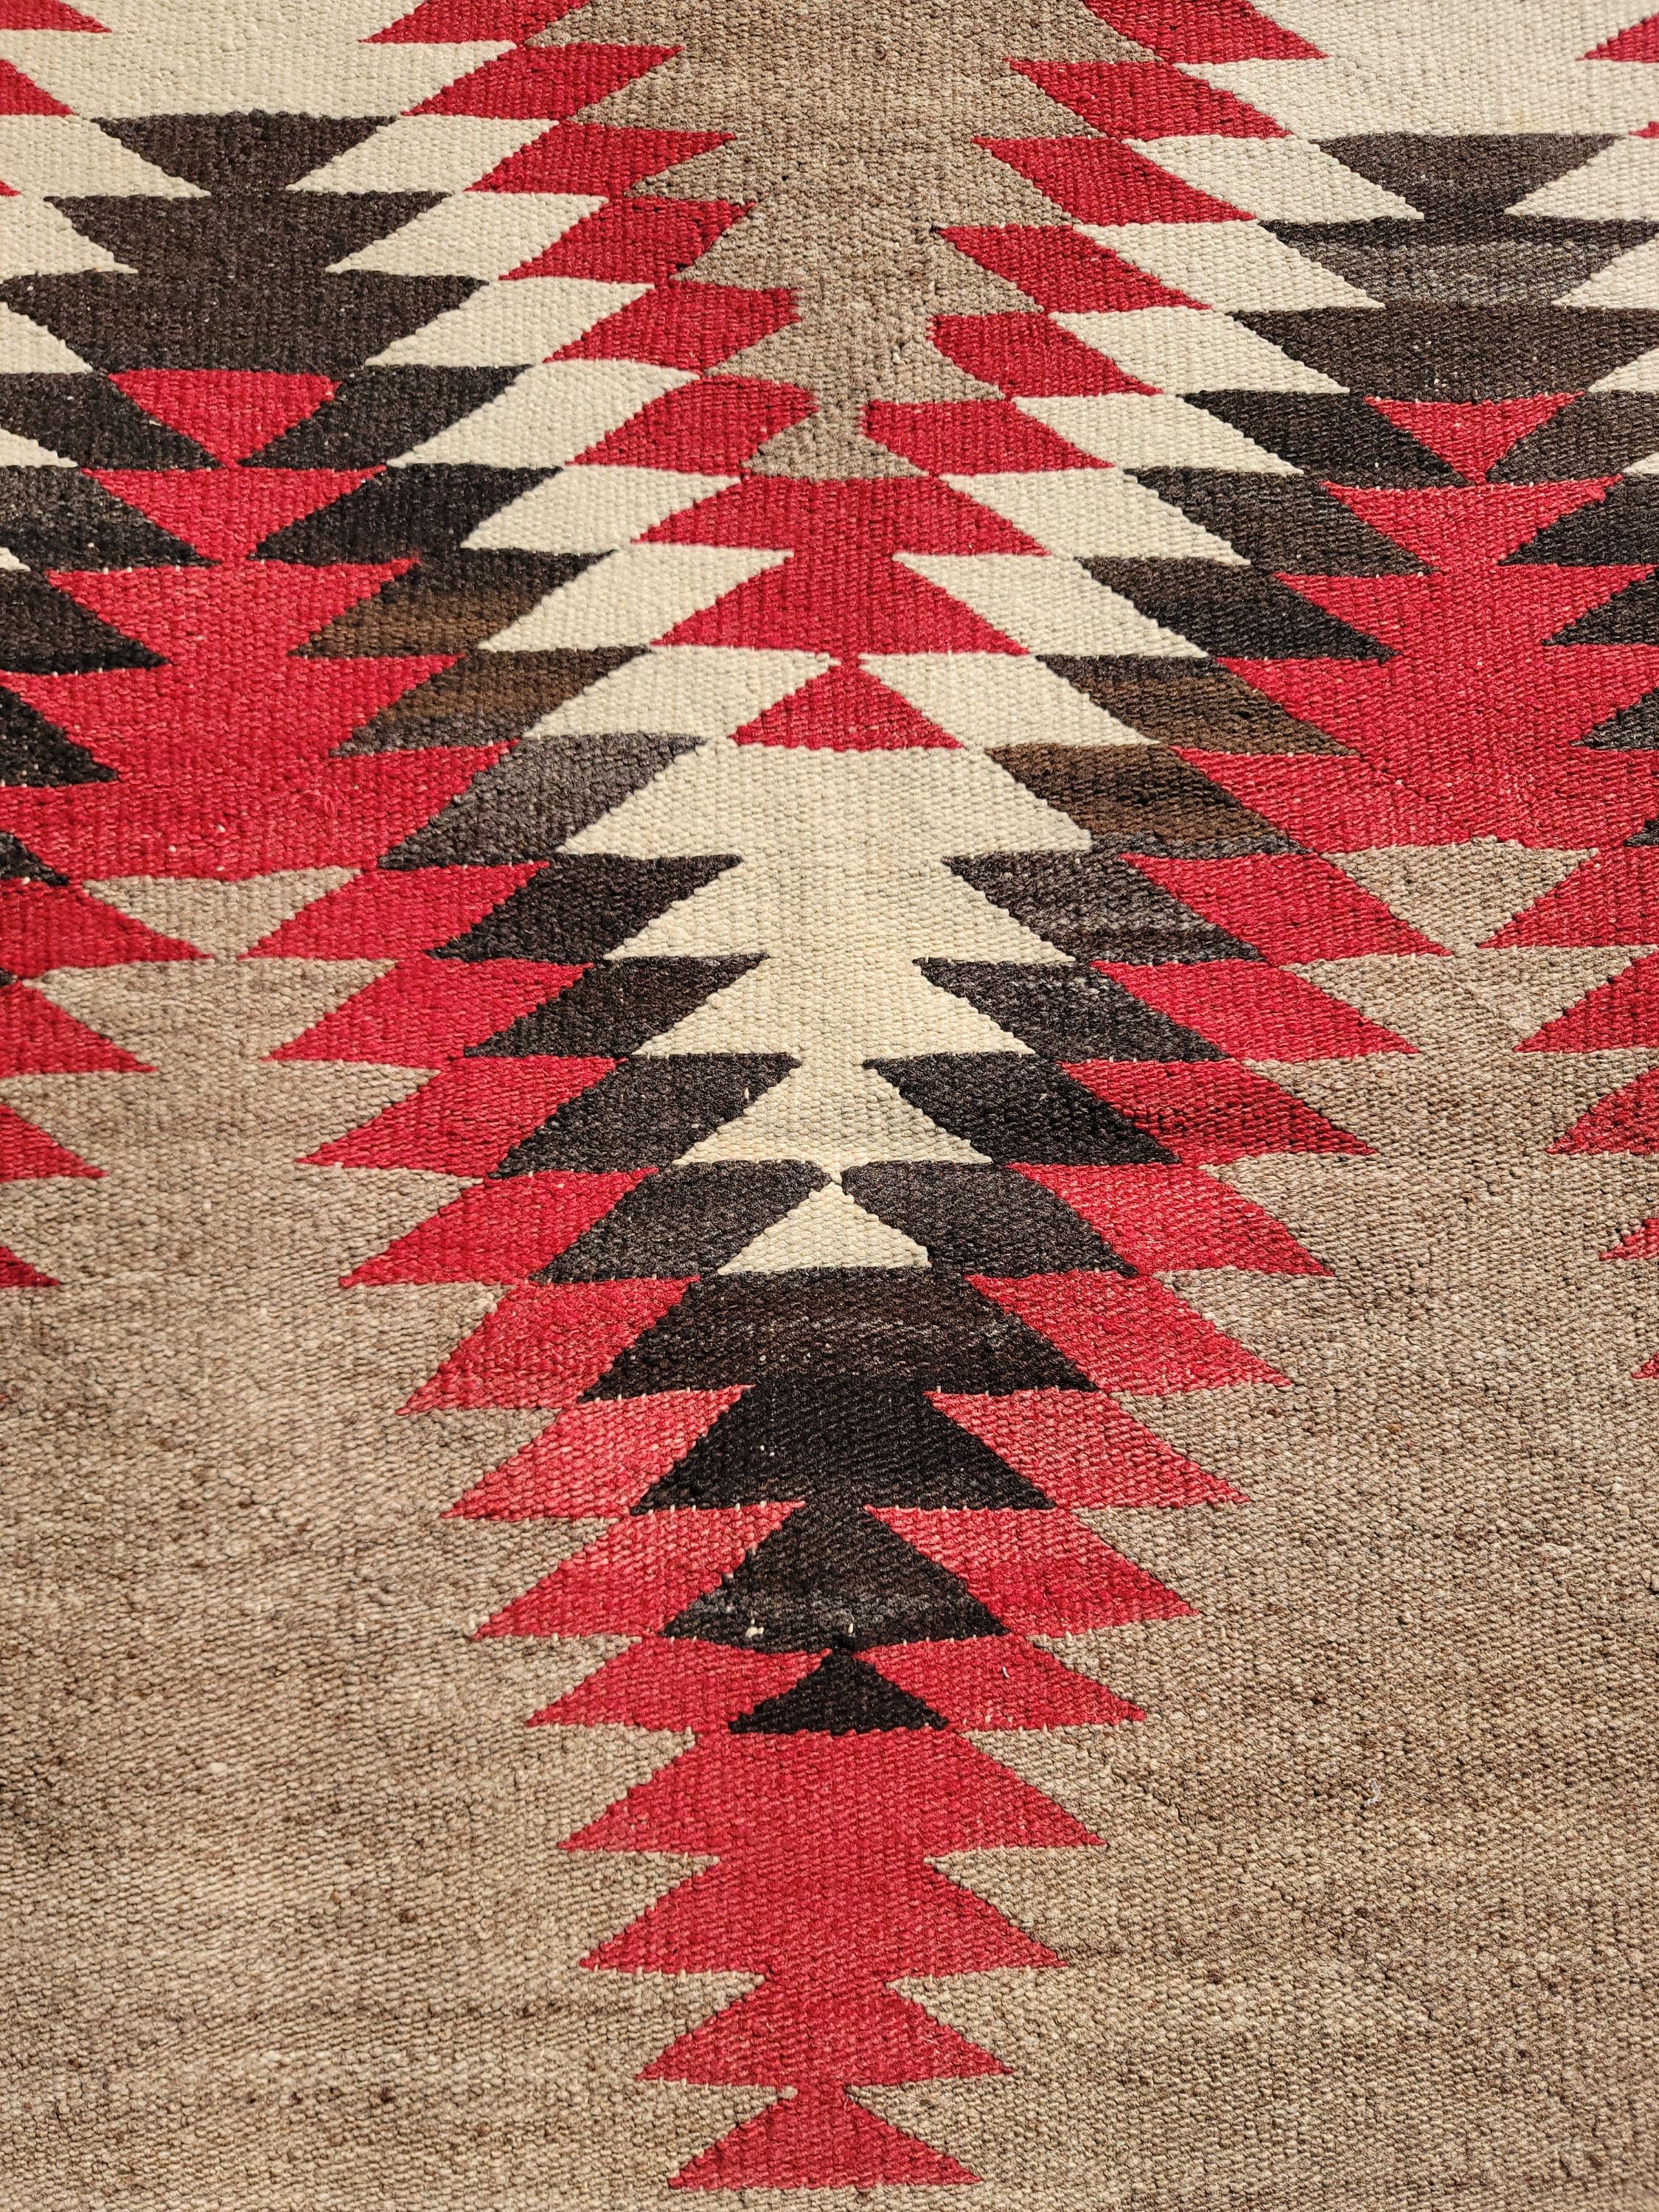 This fine reversible Navajo Indian weaving is in very good condition. One side is faded or muted in colors.